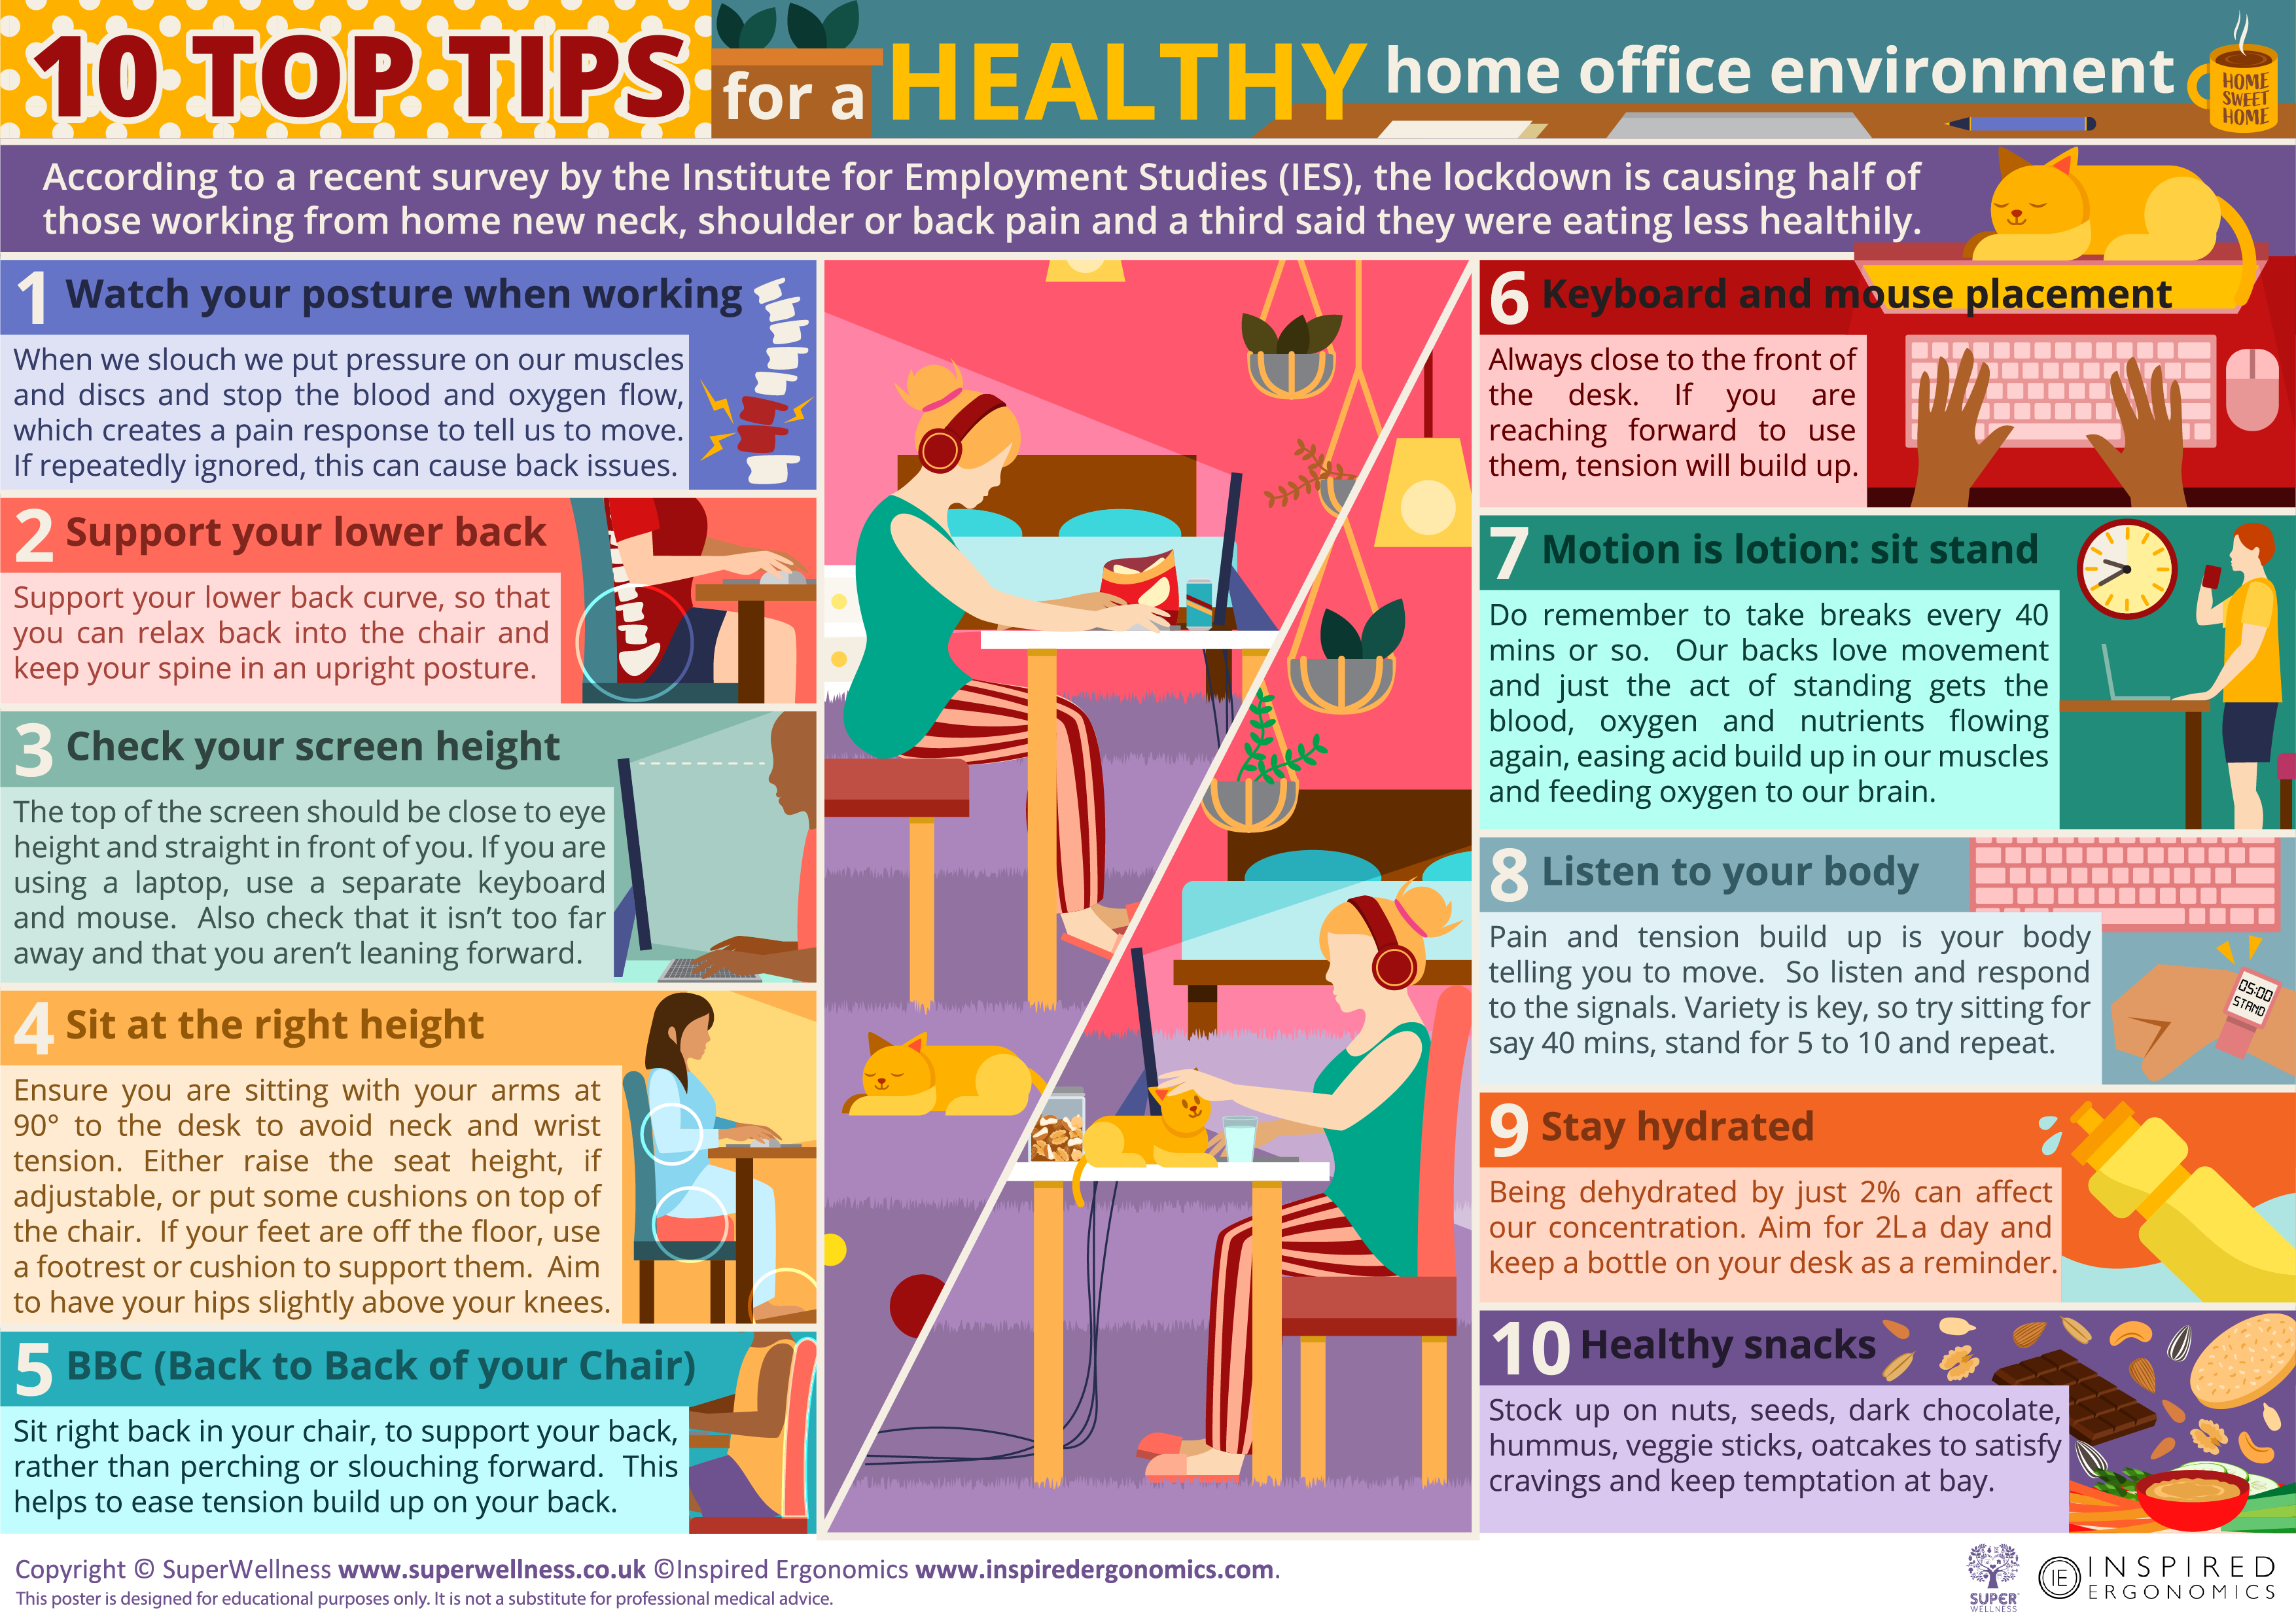 Top tips for looking after your back and healthy home office poster